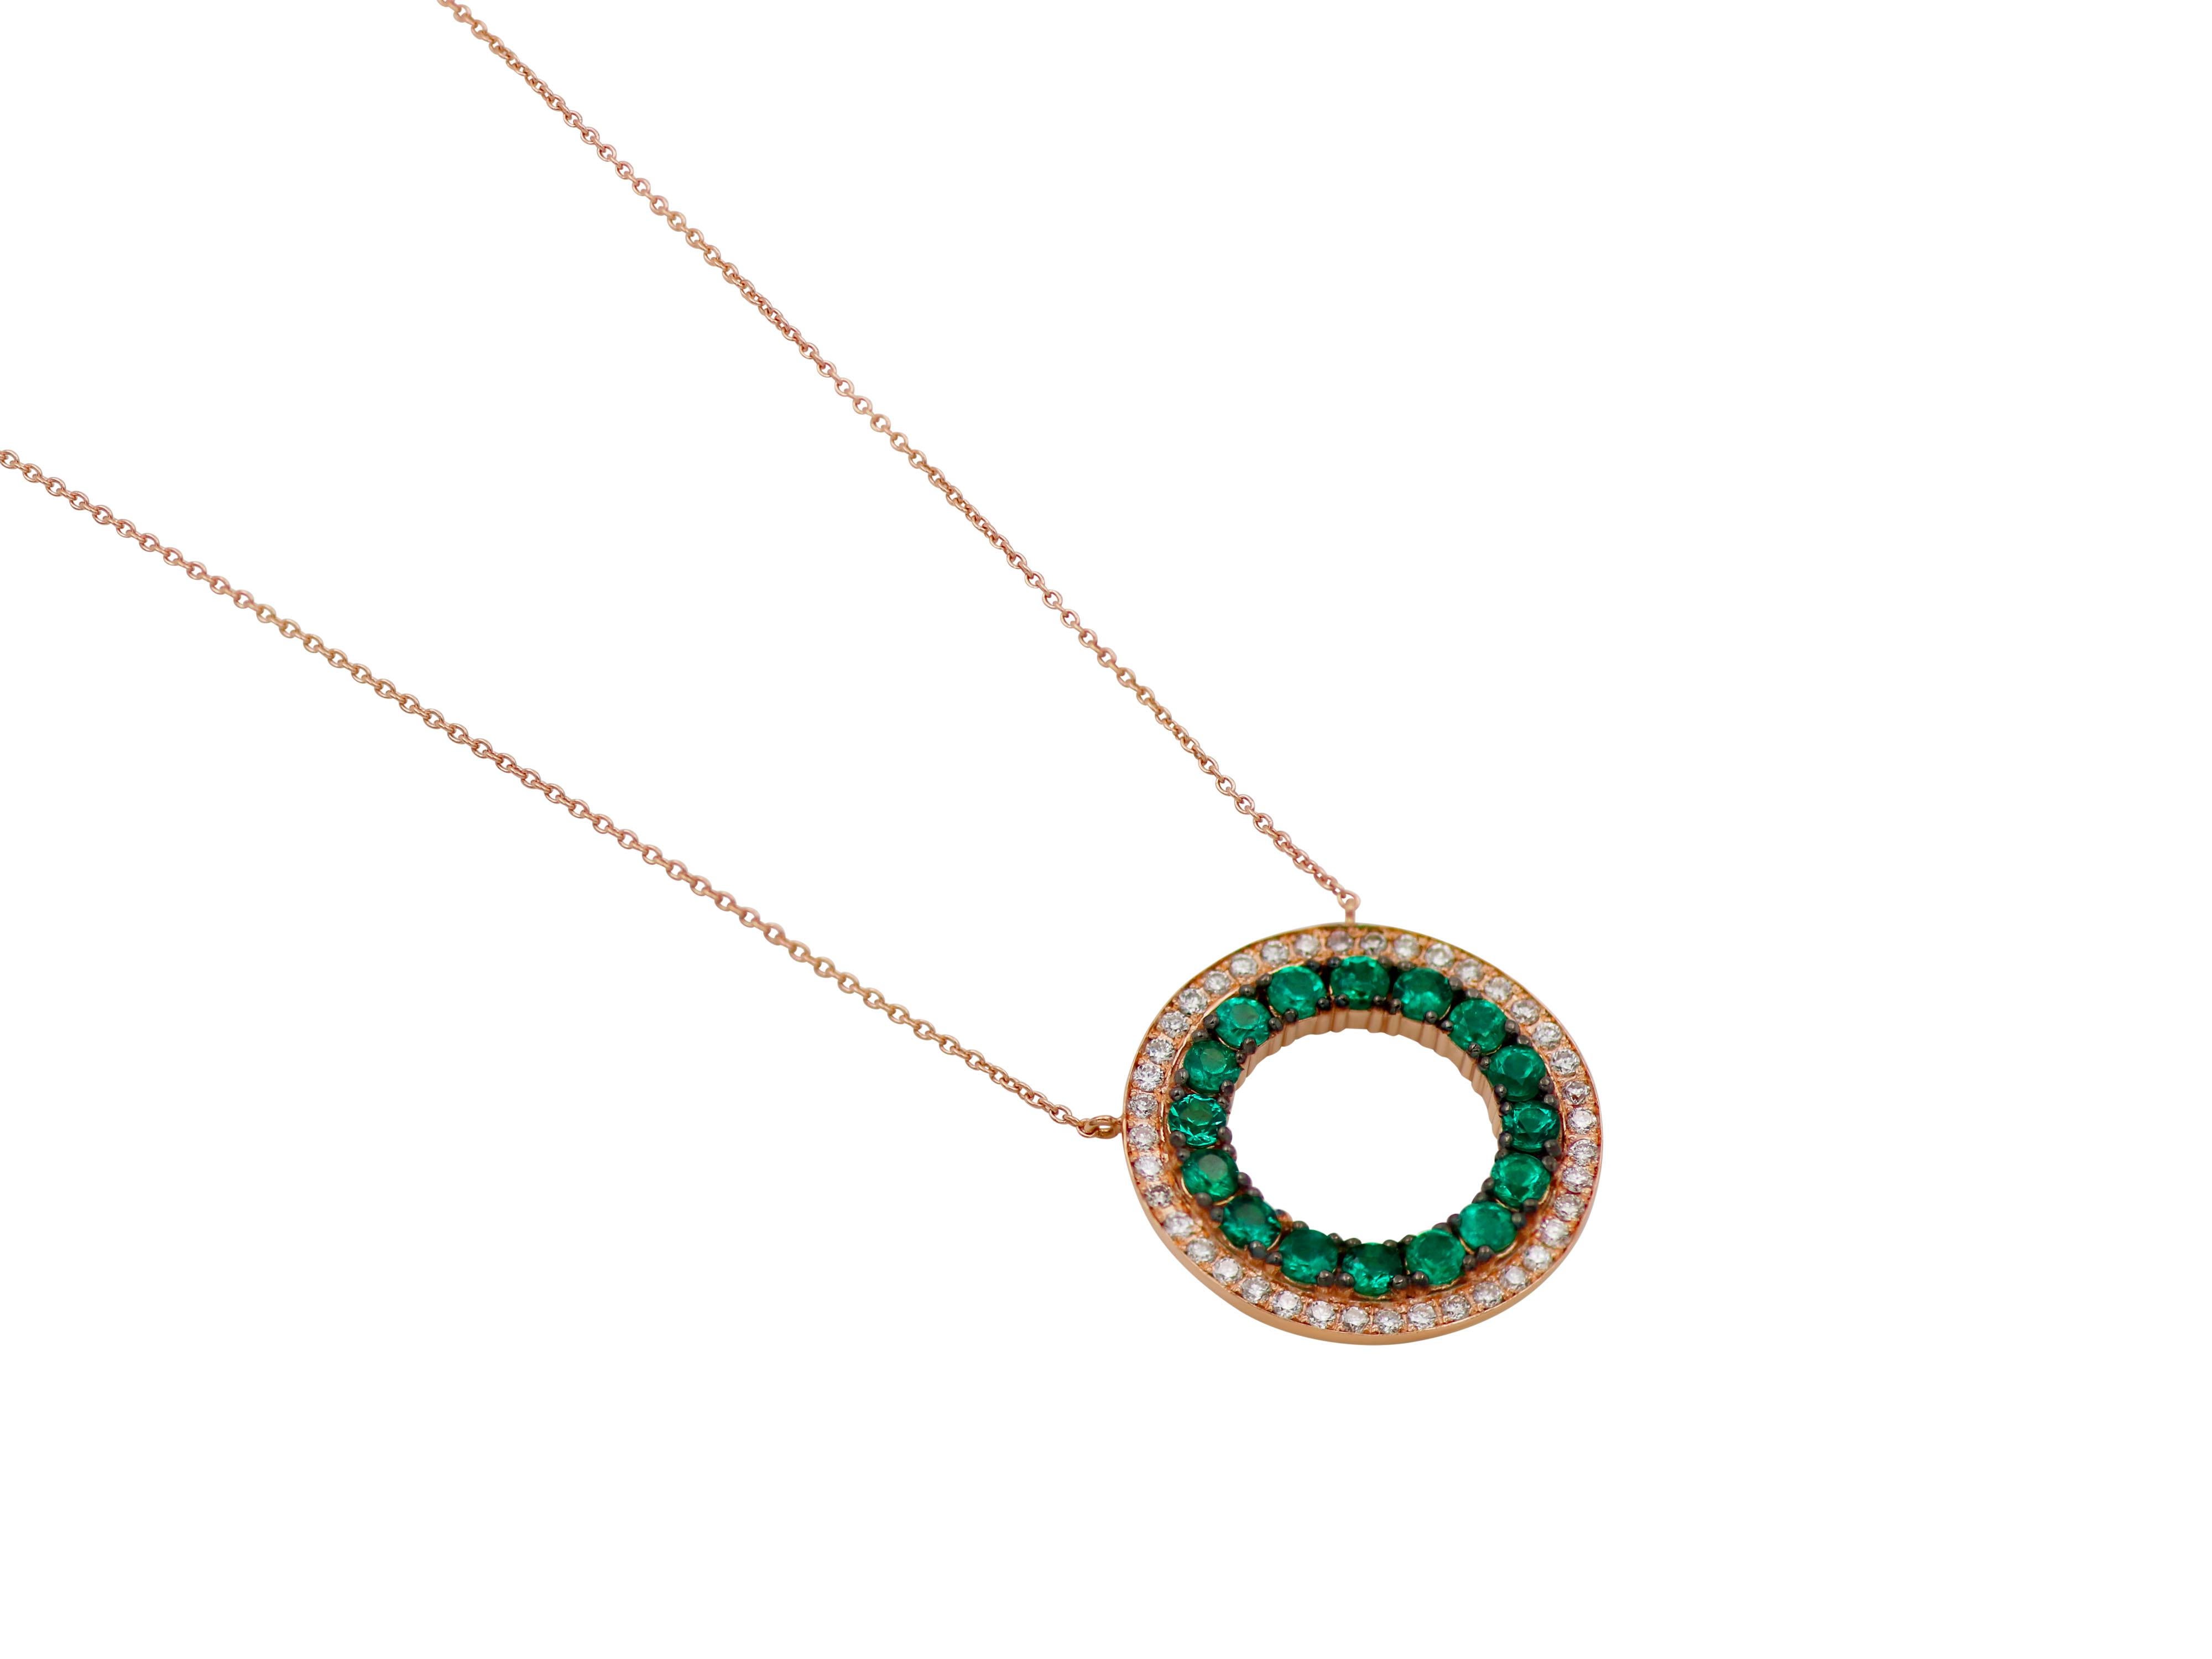 Round pendant in necklace set in 18k rose gold with 0.82 carats round cut emeralds and 0.34 carats brilliant cut diamonds